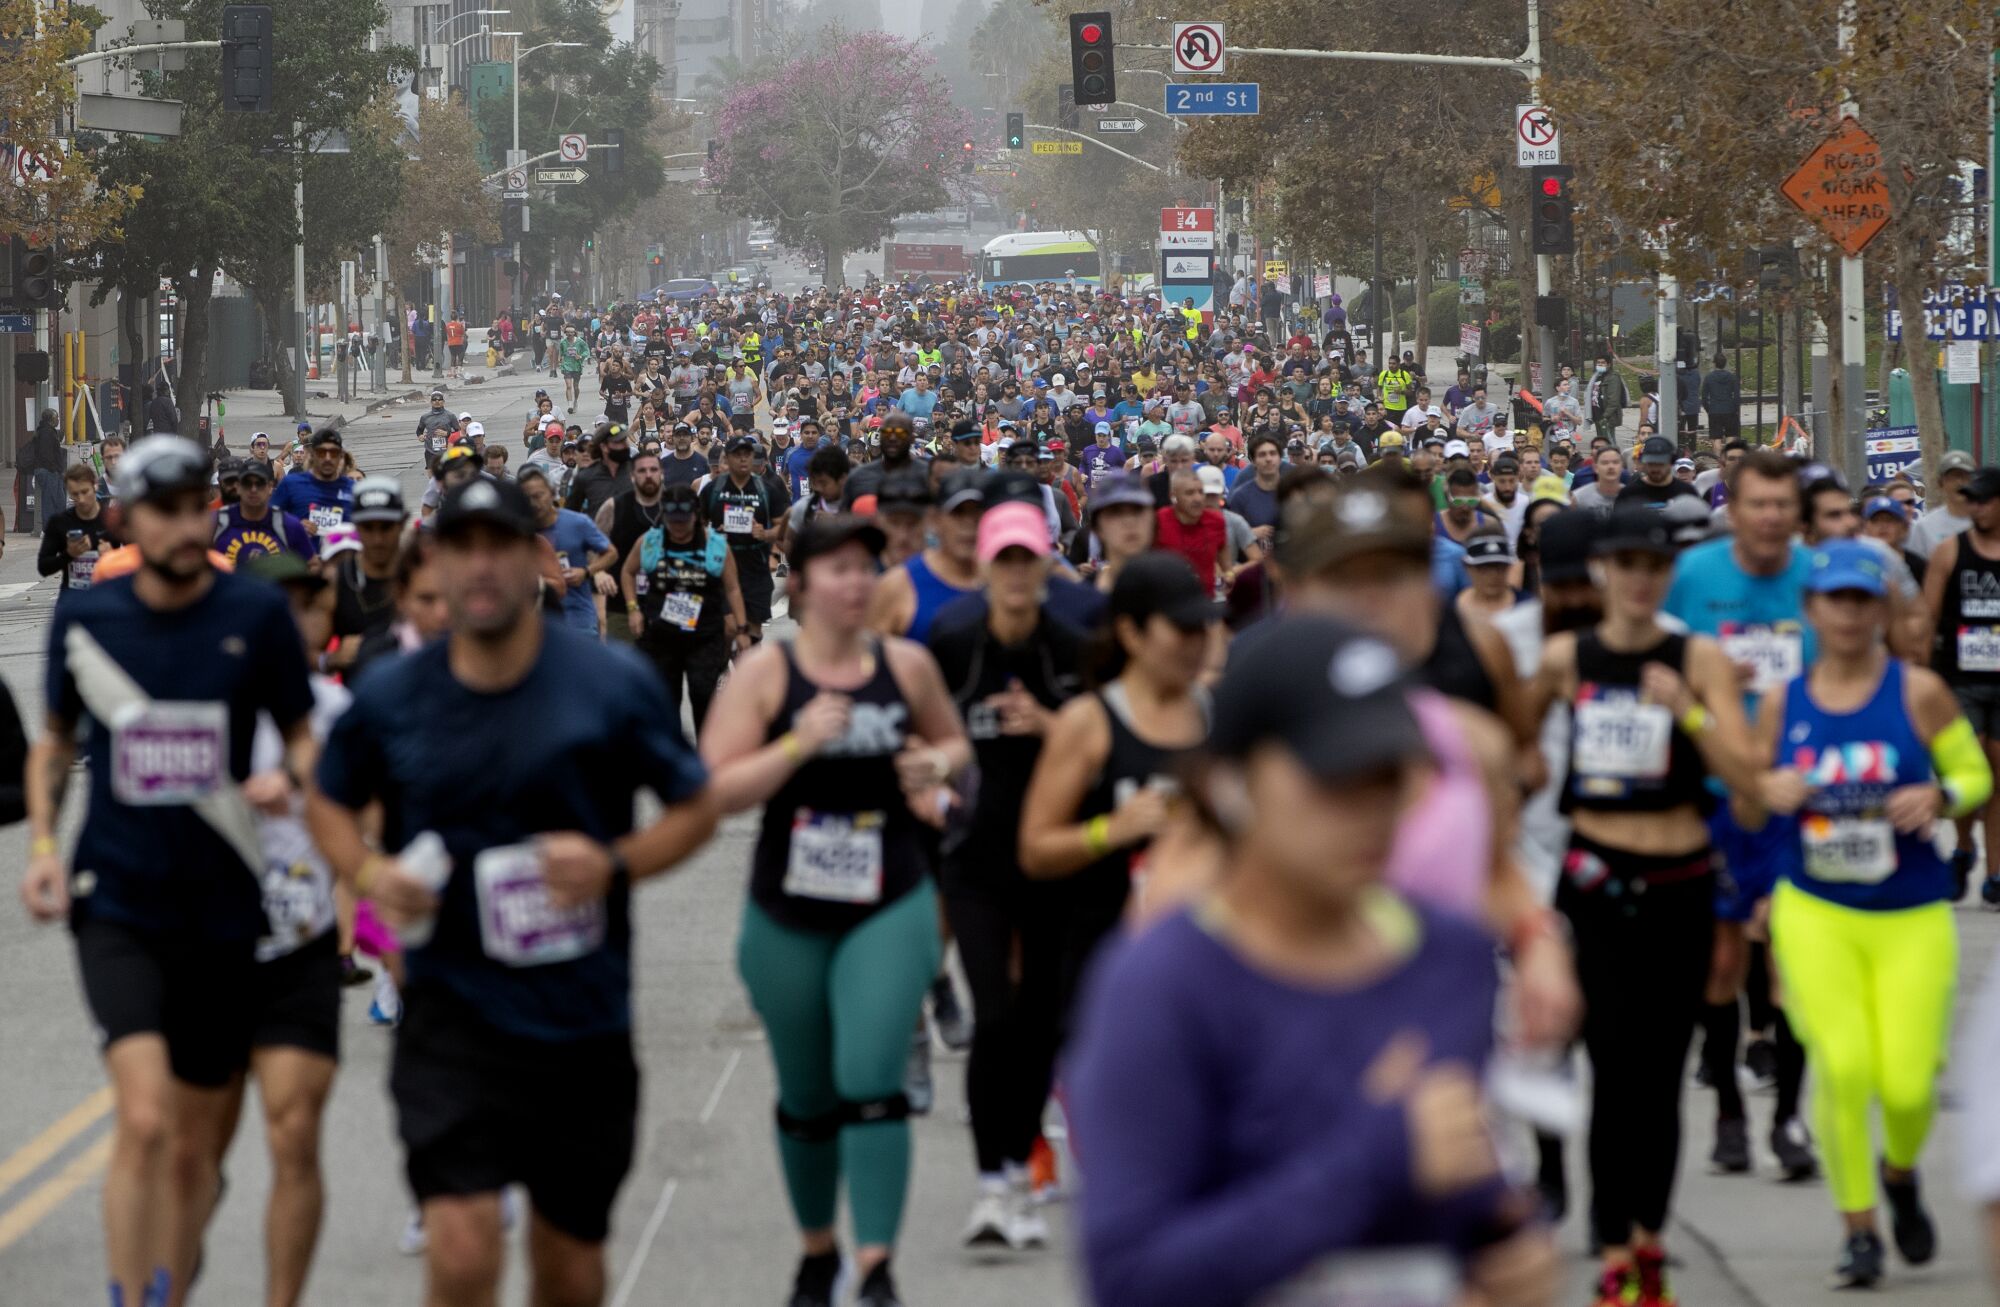 Thousands of runners fill the downtown streets.